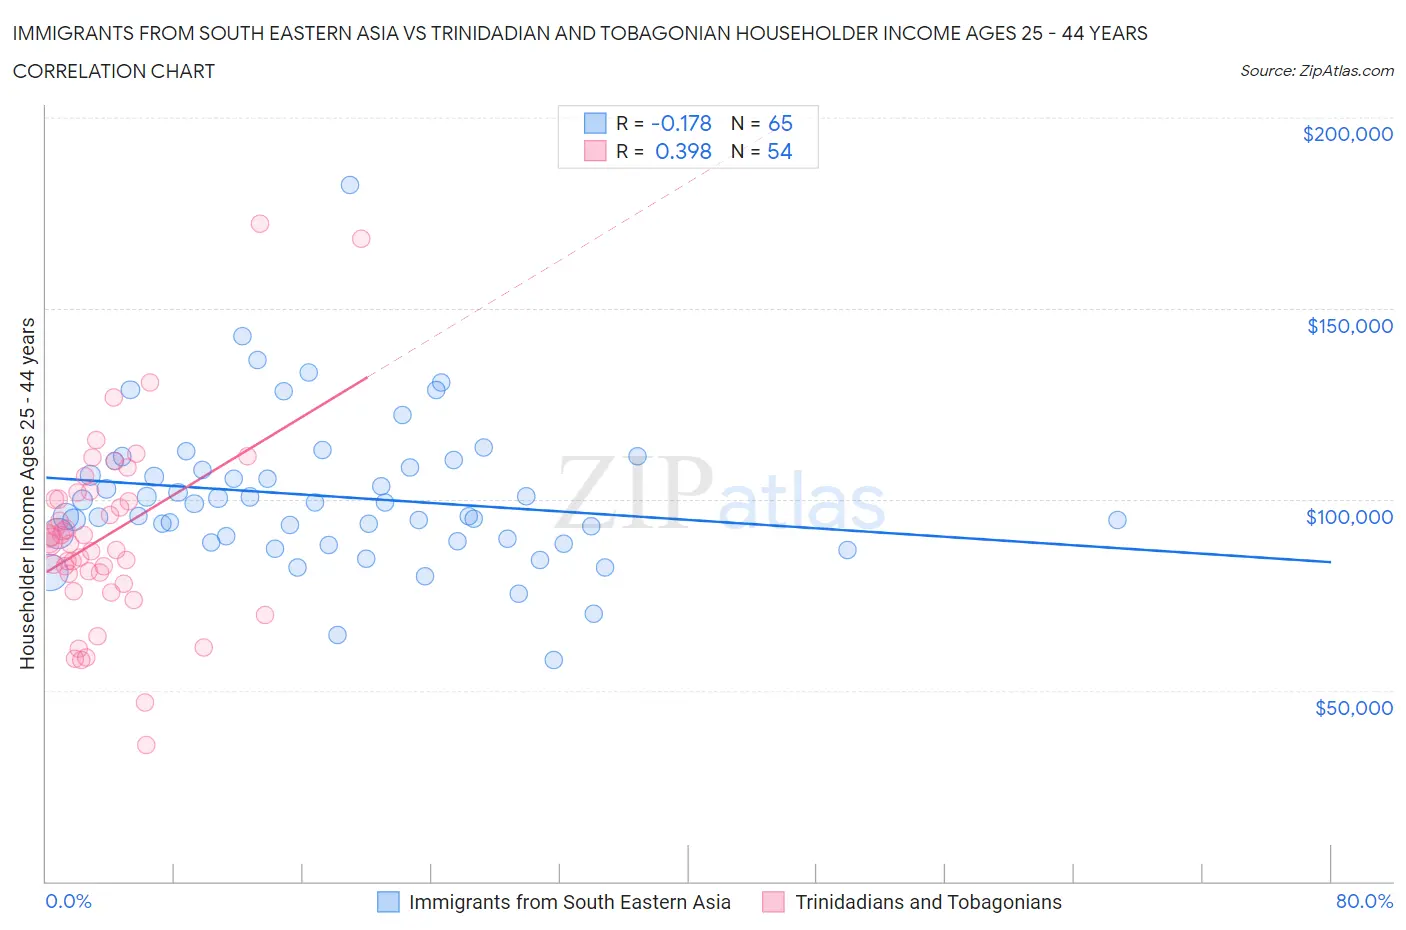 Immigrants from South Eastern Asia vs Trinidadian and Tobagonian Householder Income Ages 25 - 44 years